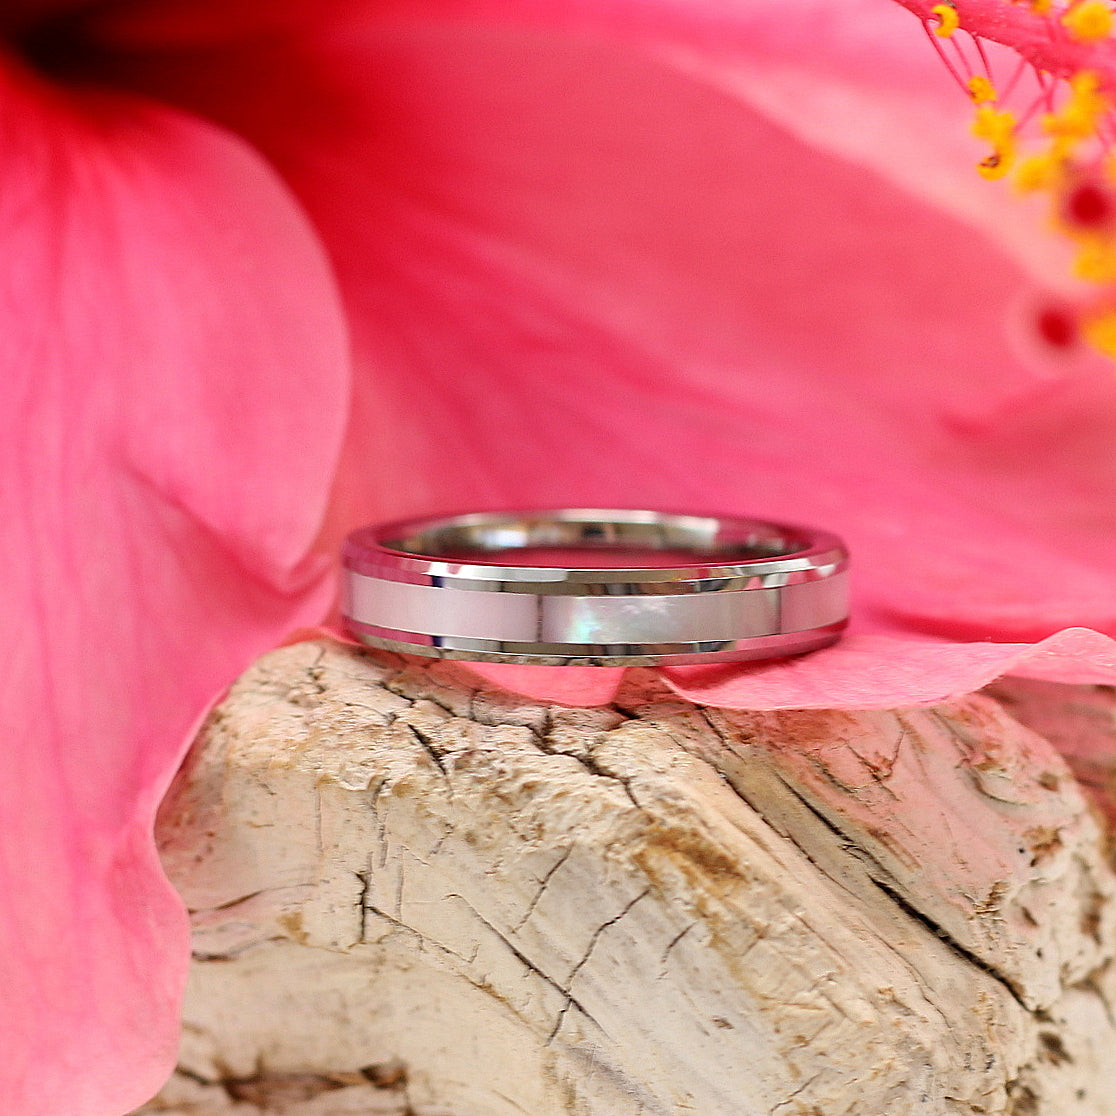 Ladies Silver tungsten ring with mother of pearl inlay, 4mm band, engrave a special message on the inside for R80.